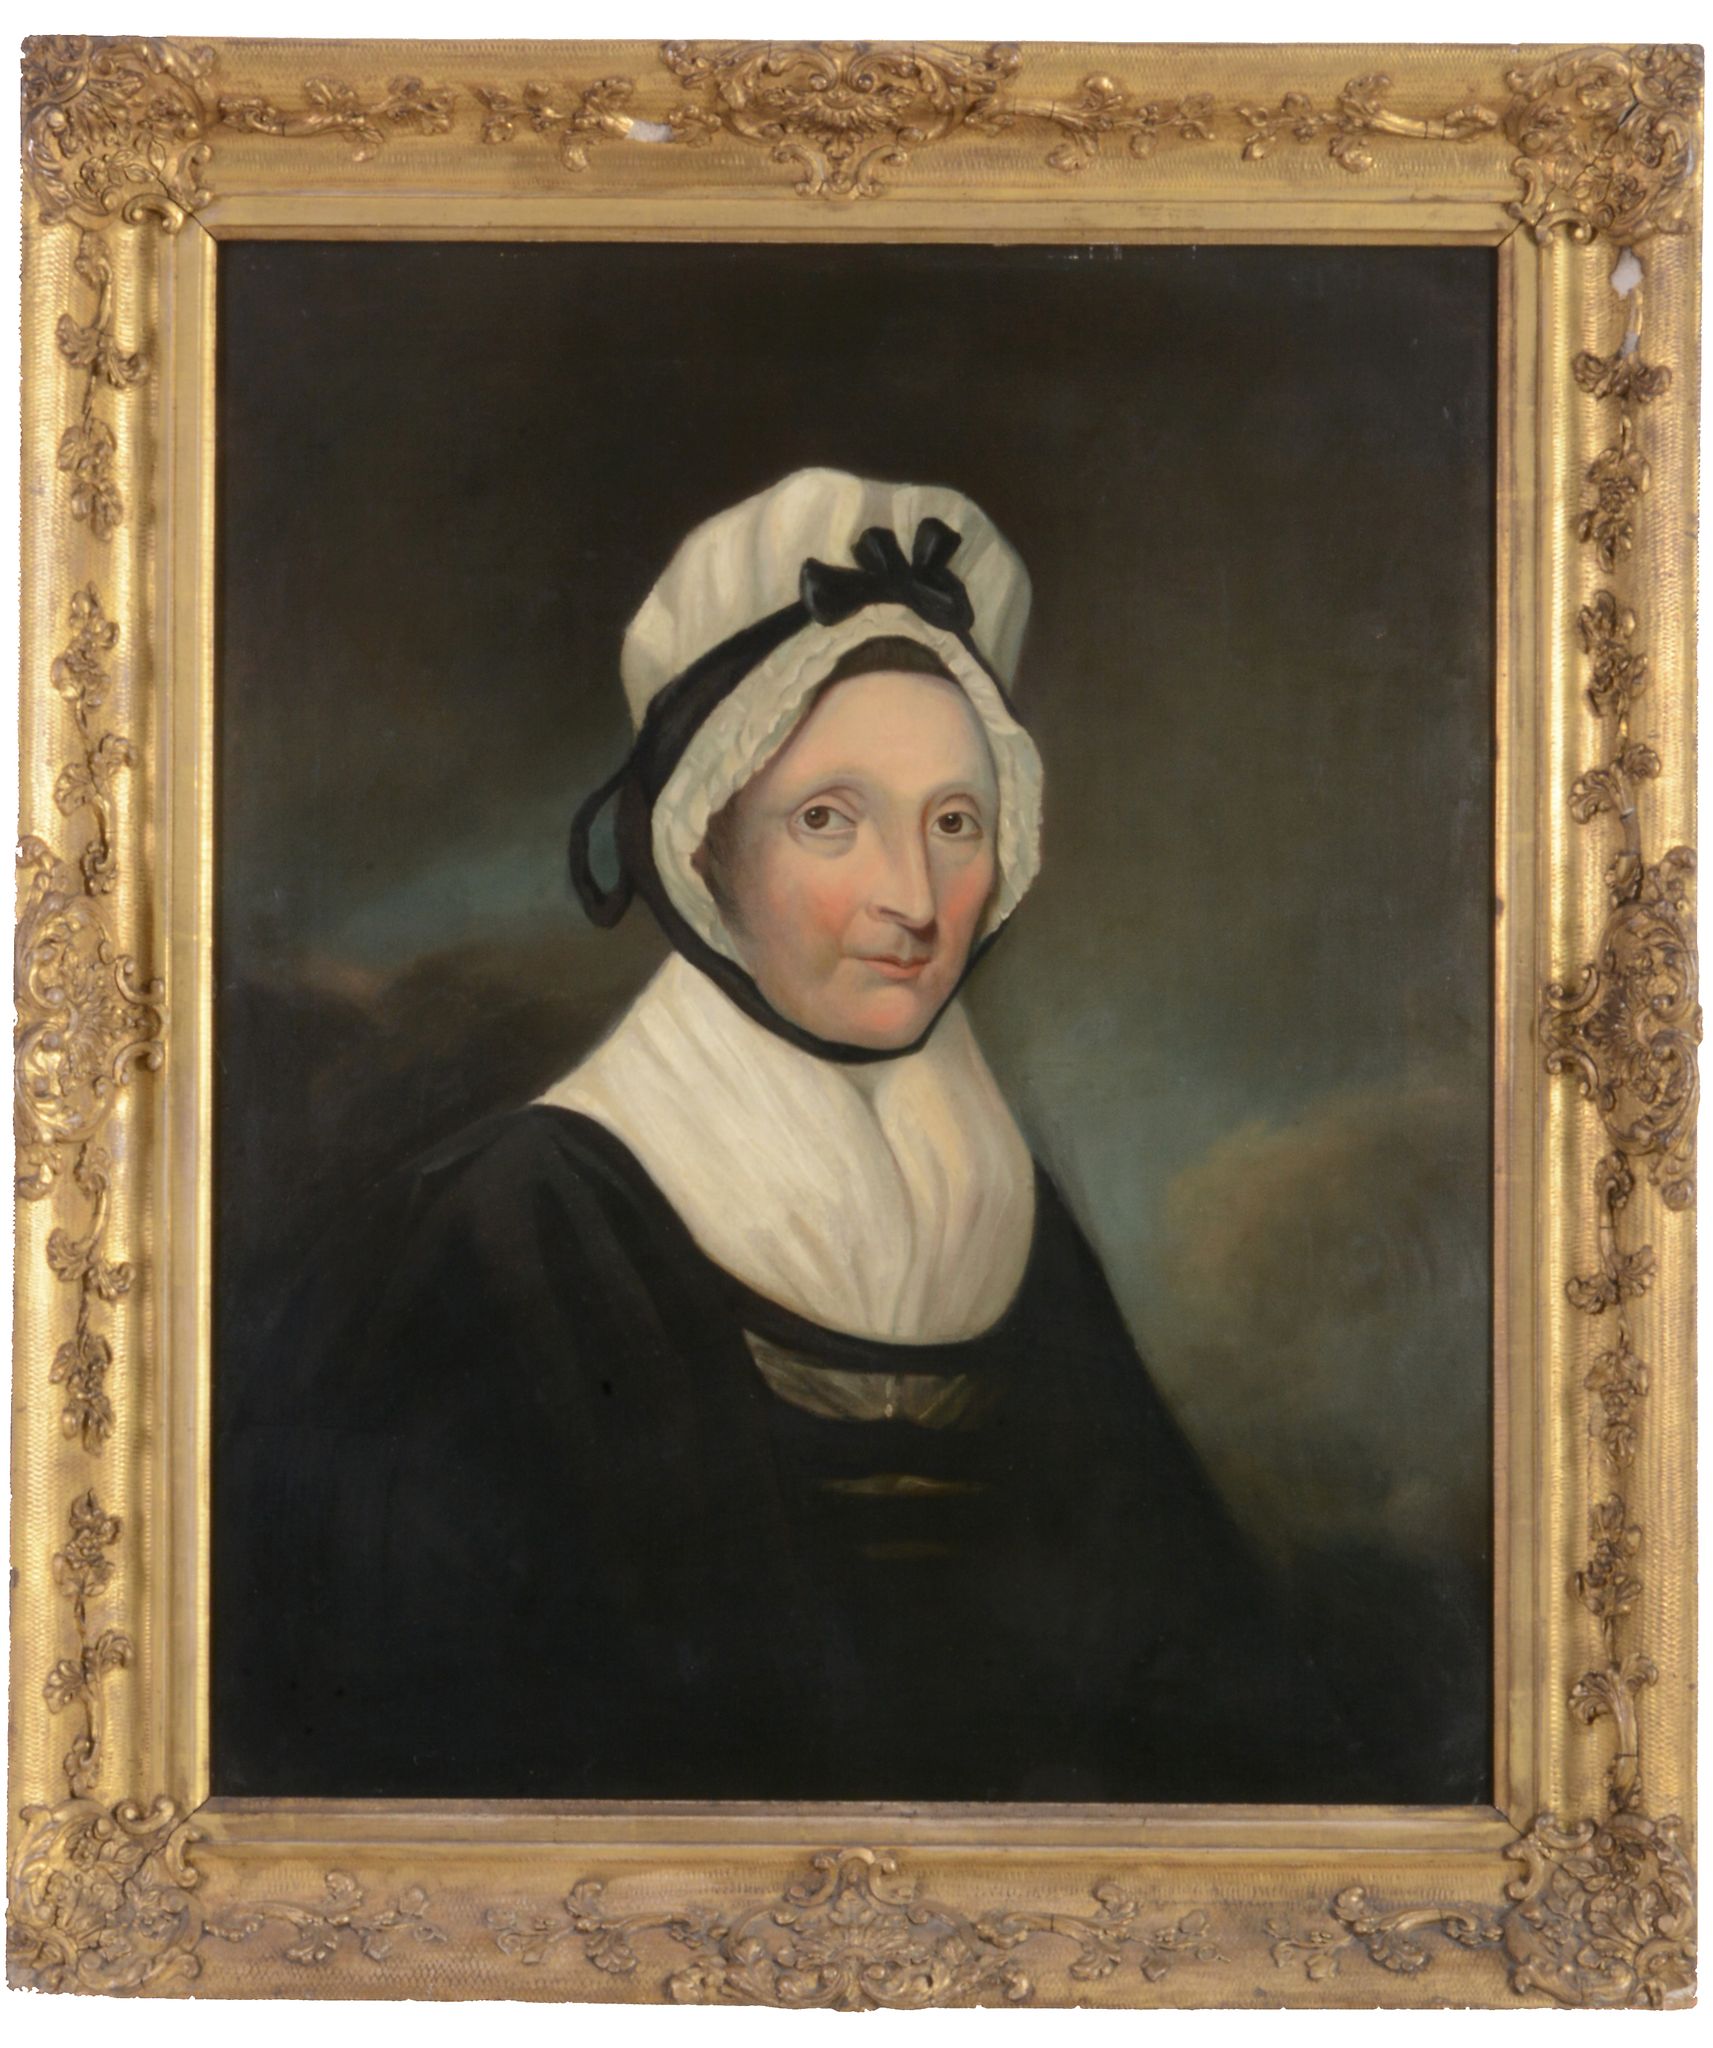 English School (19th century) - Bust portrait of a lady wearing a white bonnet  Oil on canvas 76 x - Image 2 of 3